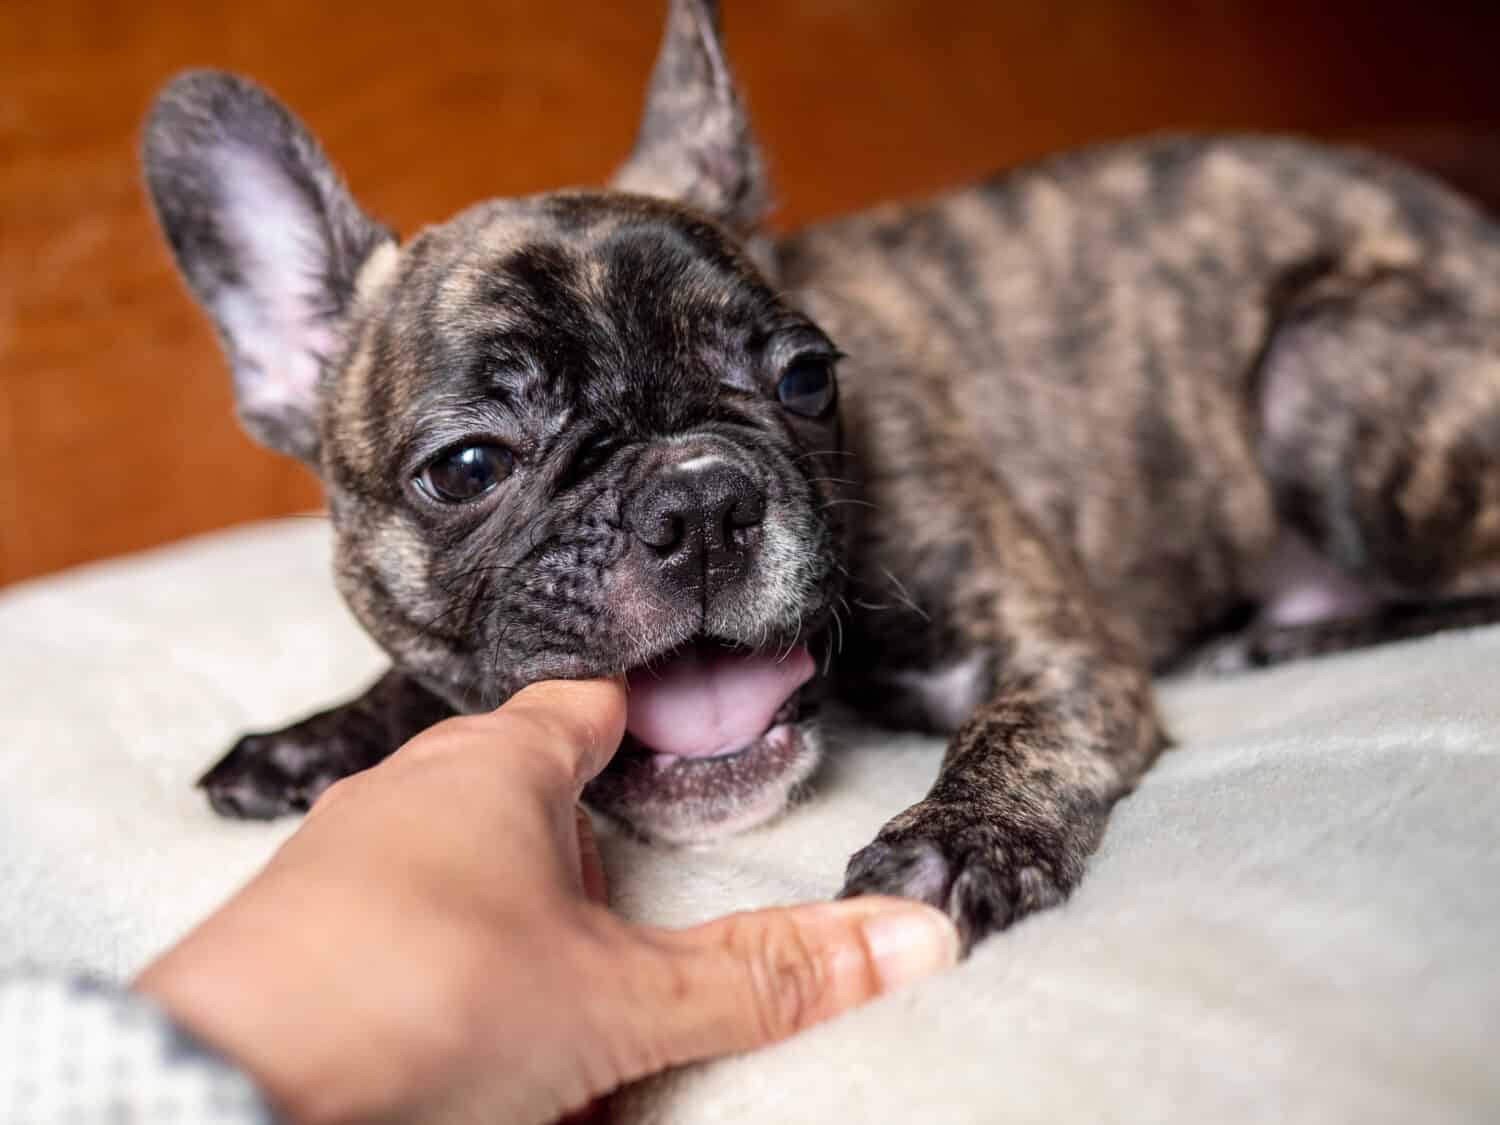 Baby French bulldog chewing a finger